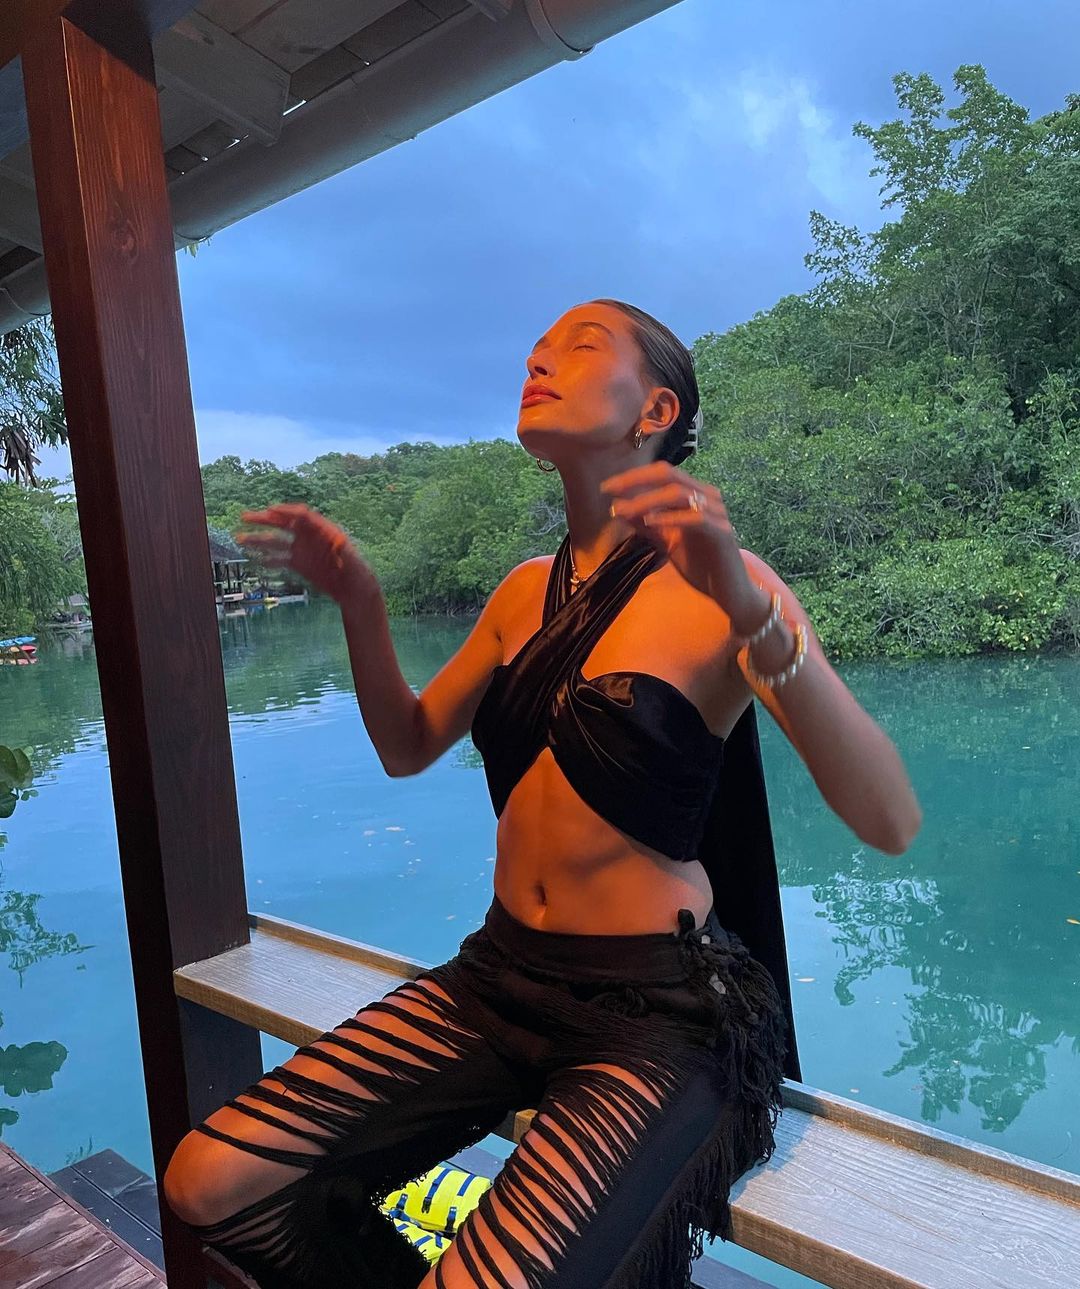 Photos n°1 : Hailey Bieber is On Vacation!